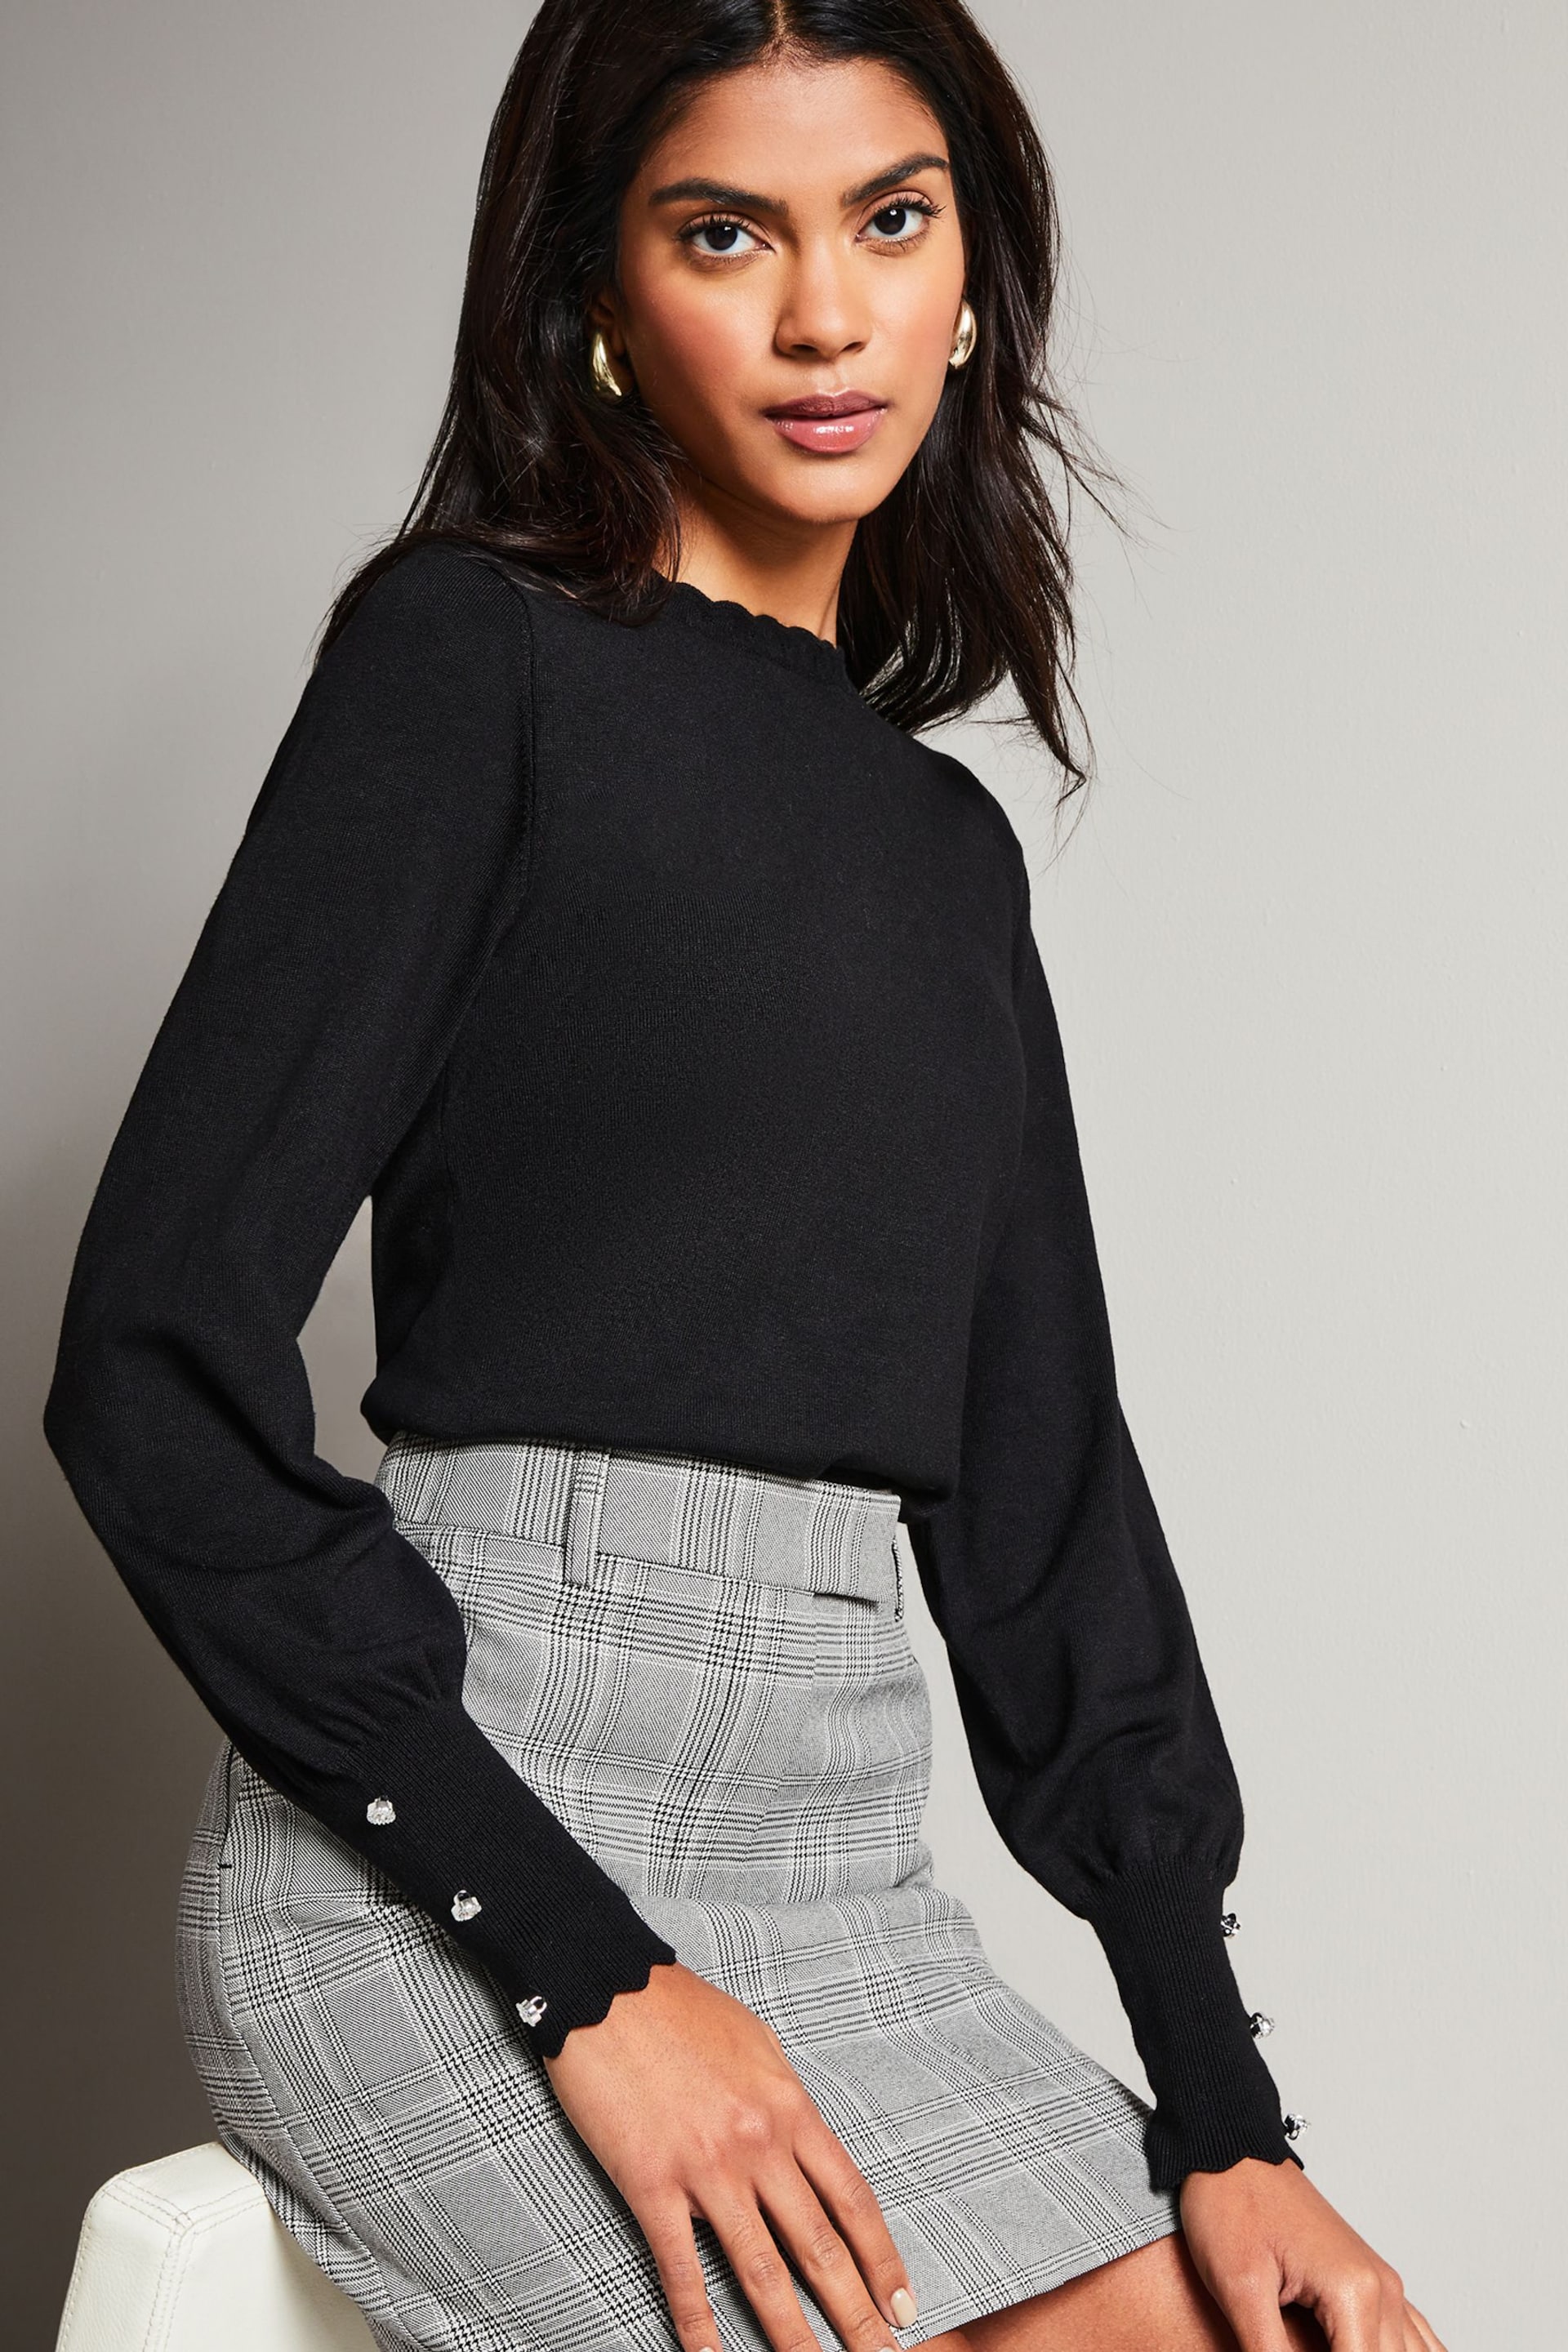 Lipsy Black Long Sleeve Scallop Detail Knitted Jumper - Image 4 of 4